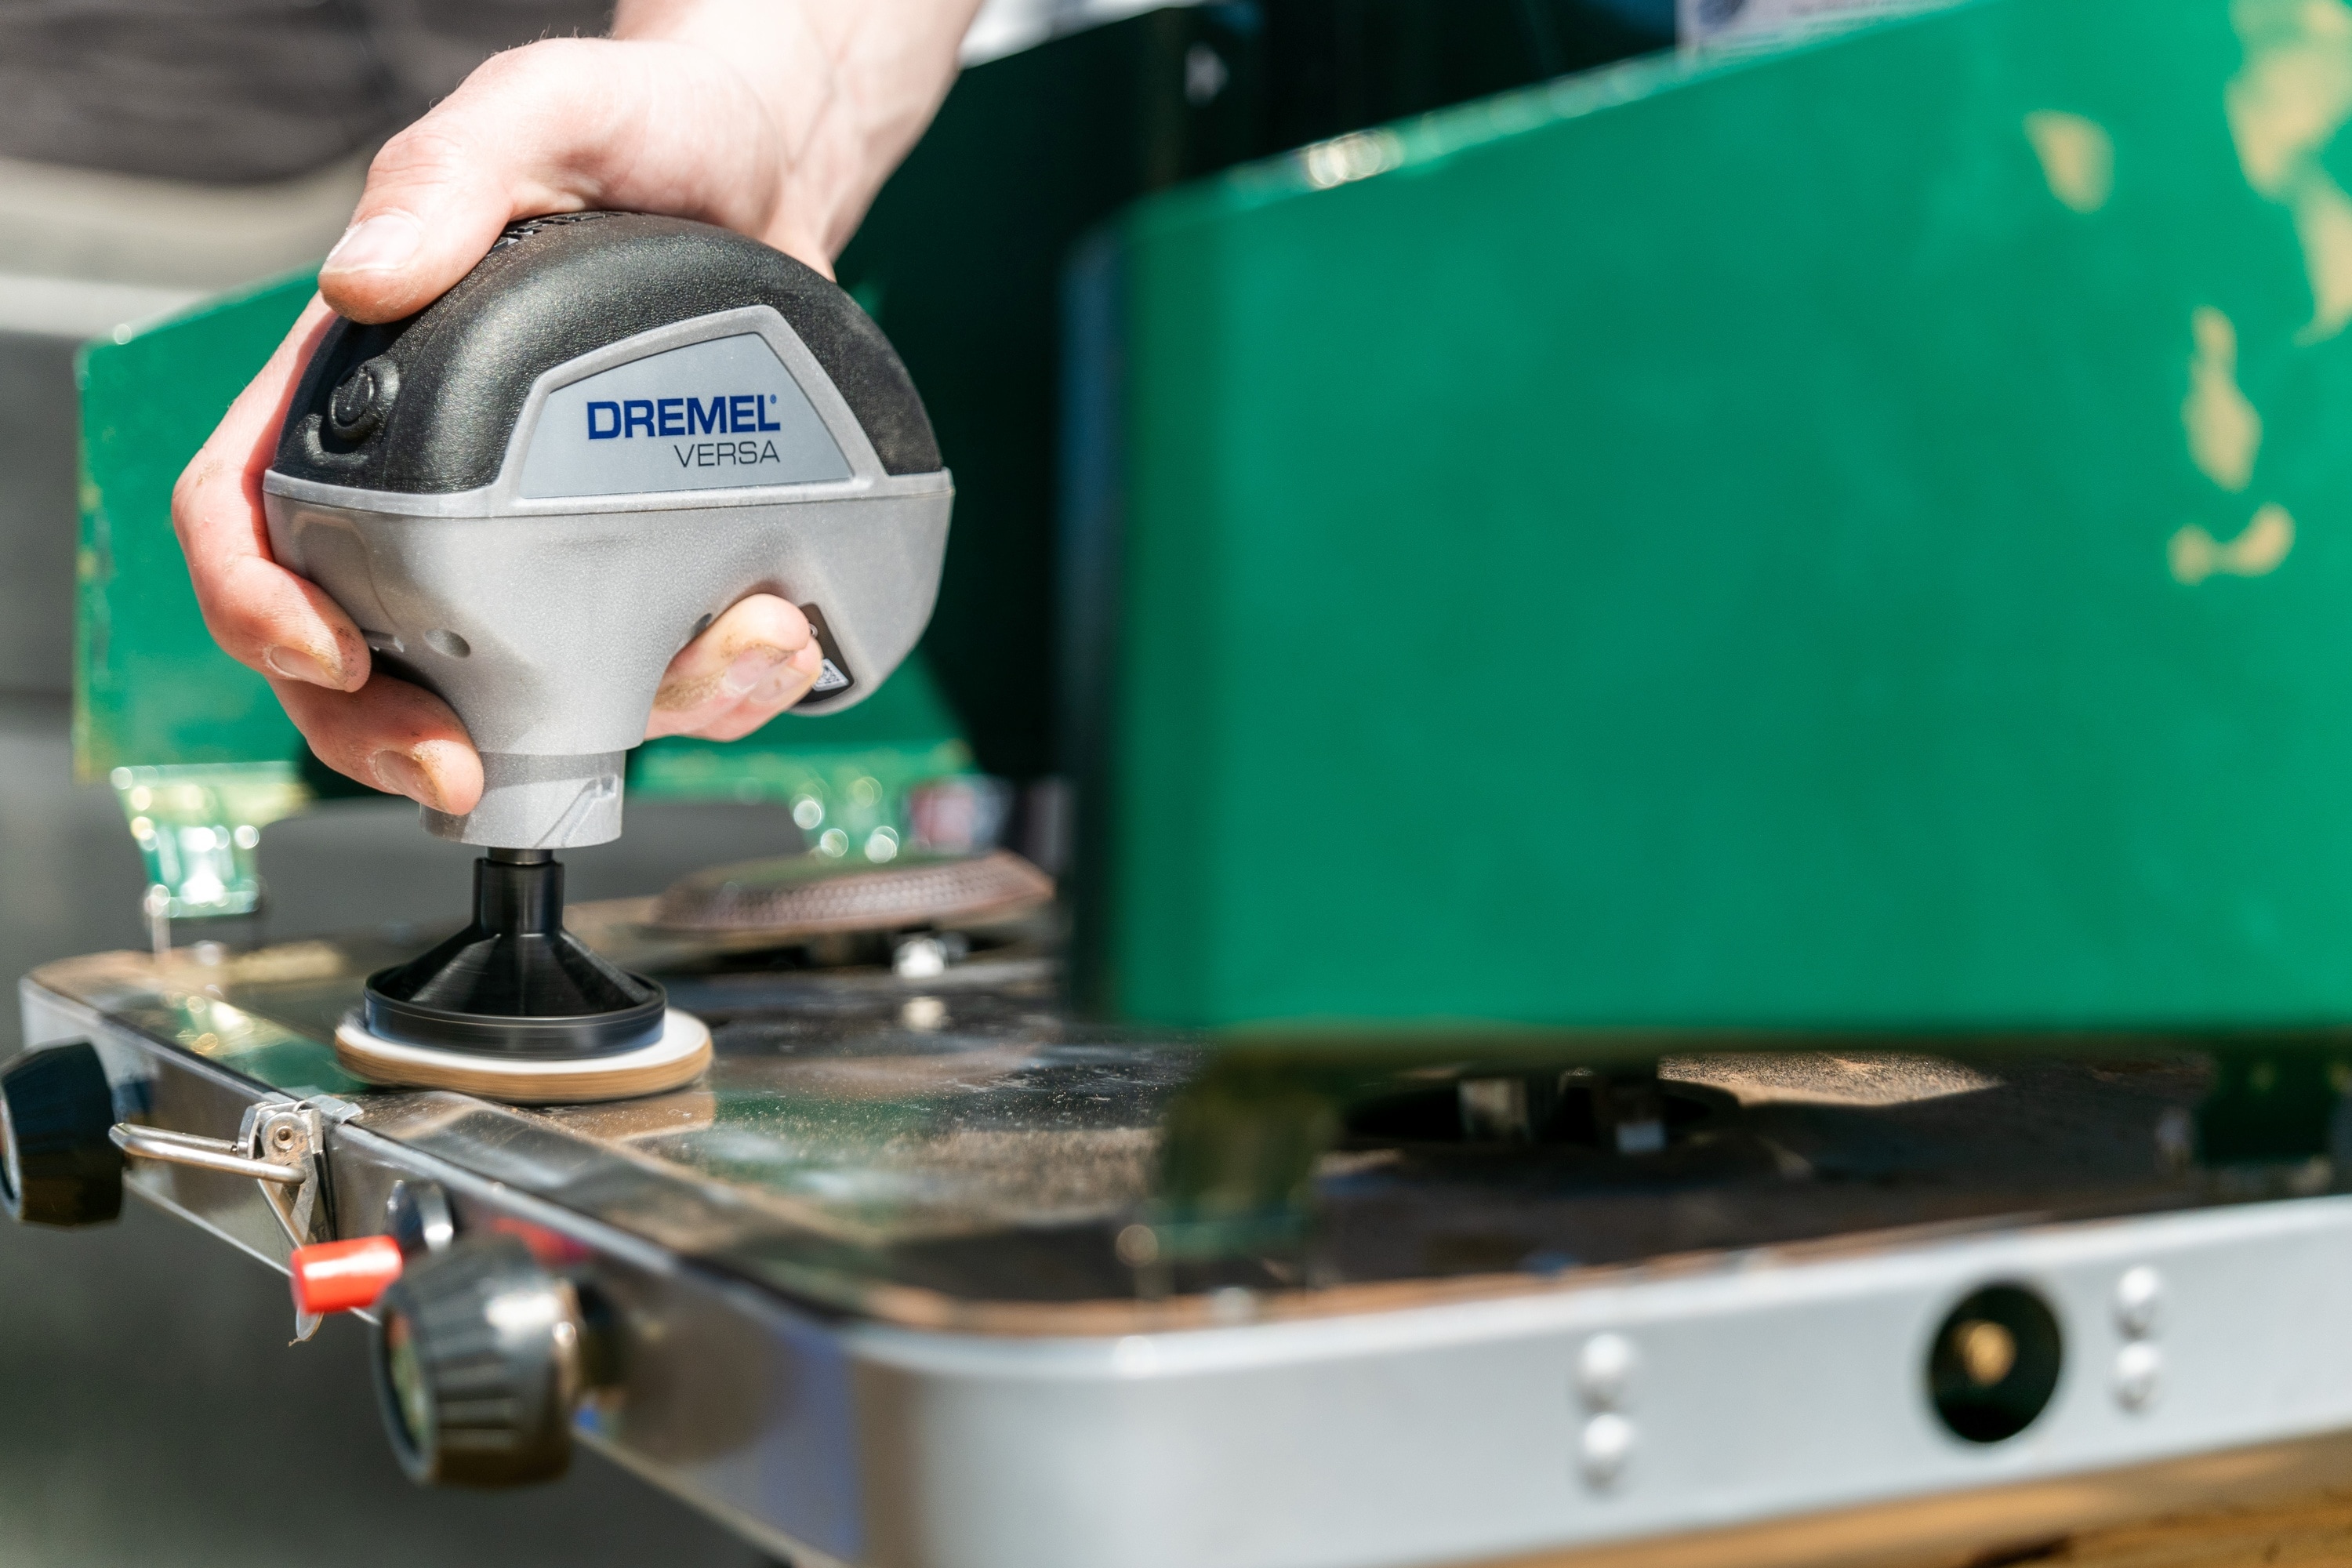 Dremel Versa Power Scrubber at in Scrubbers the Power department